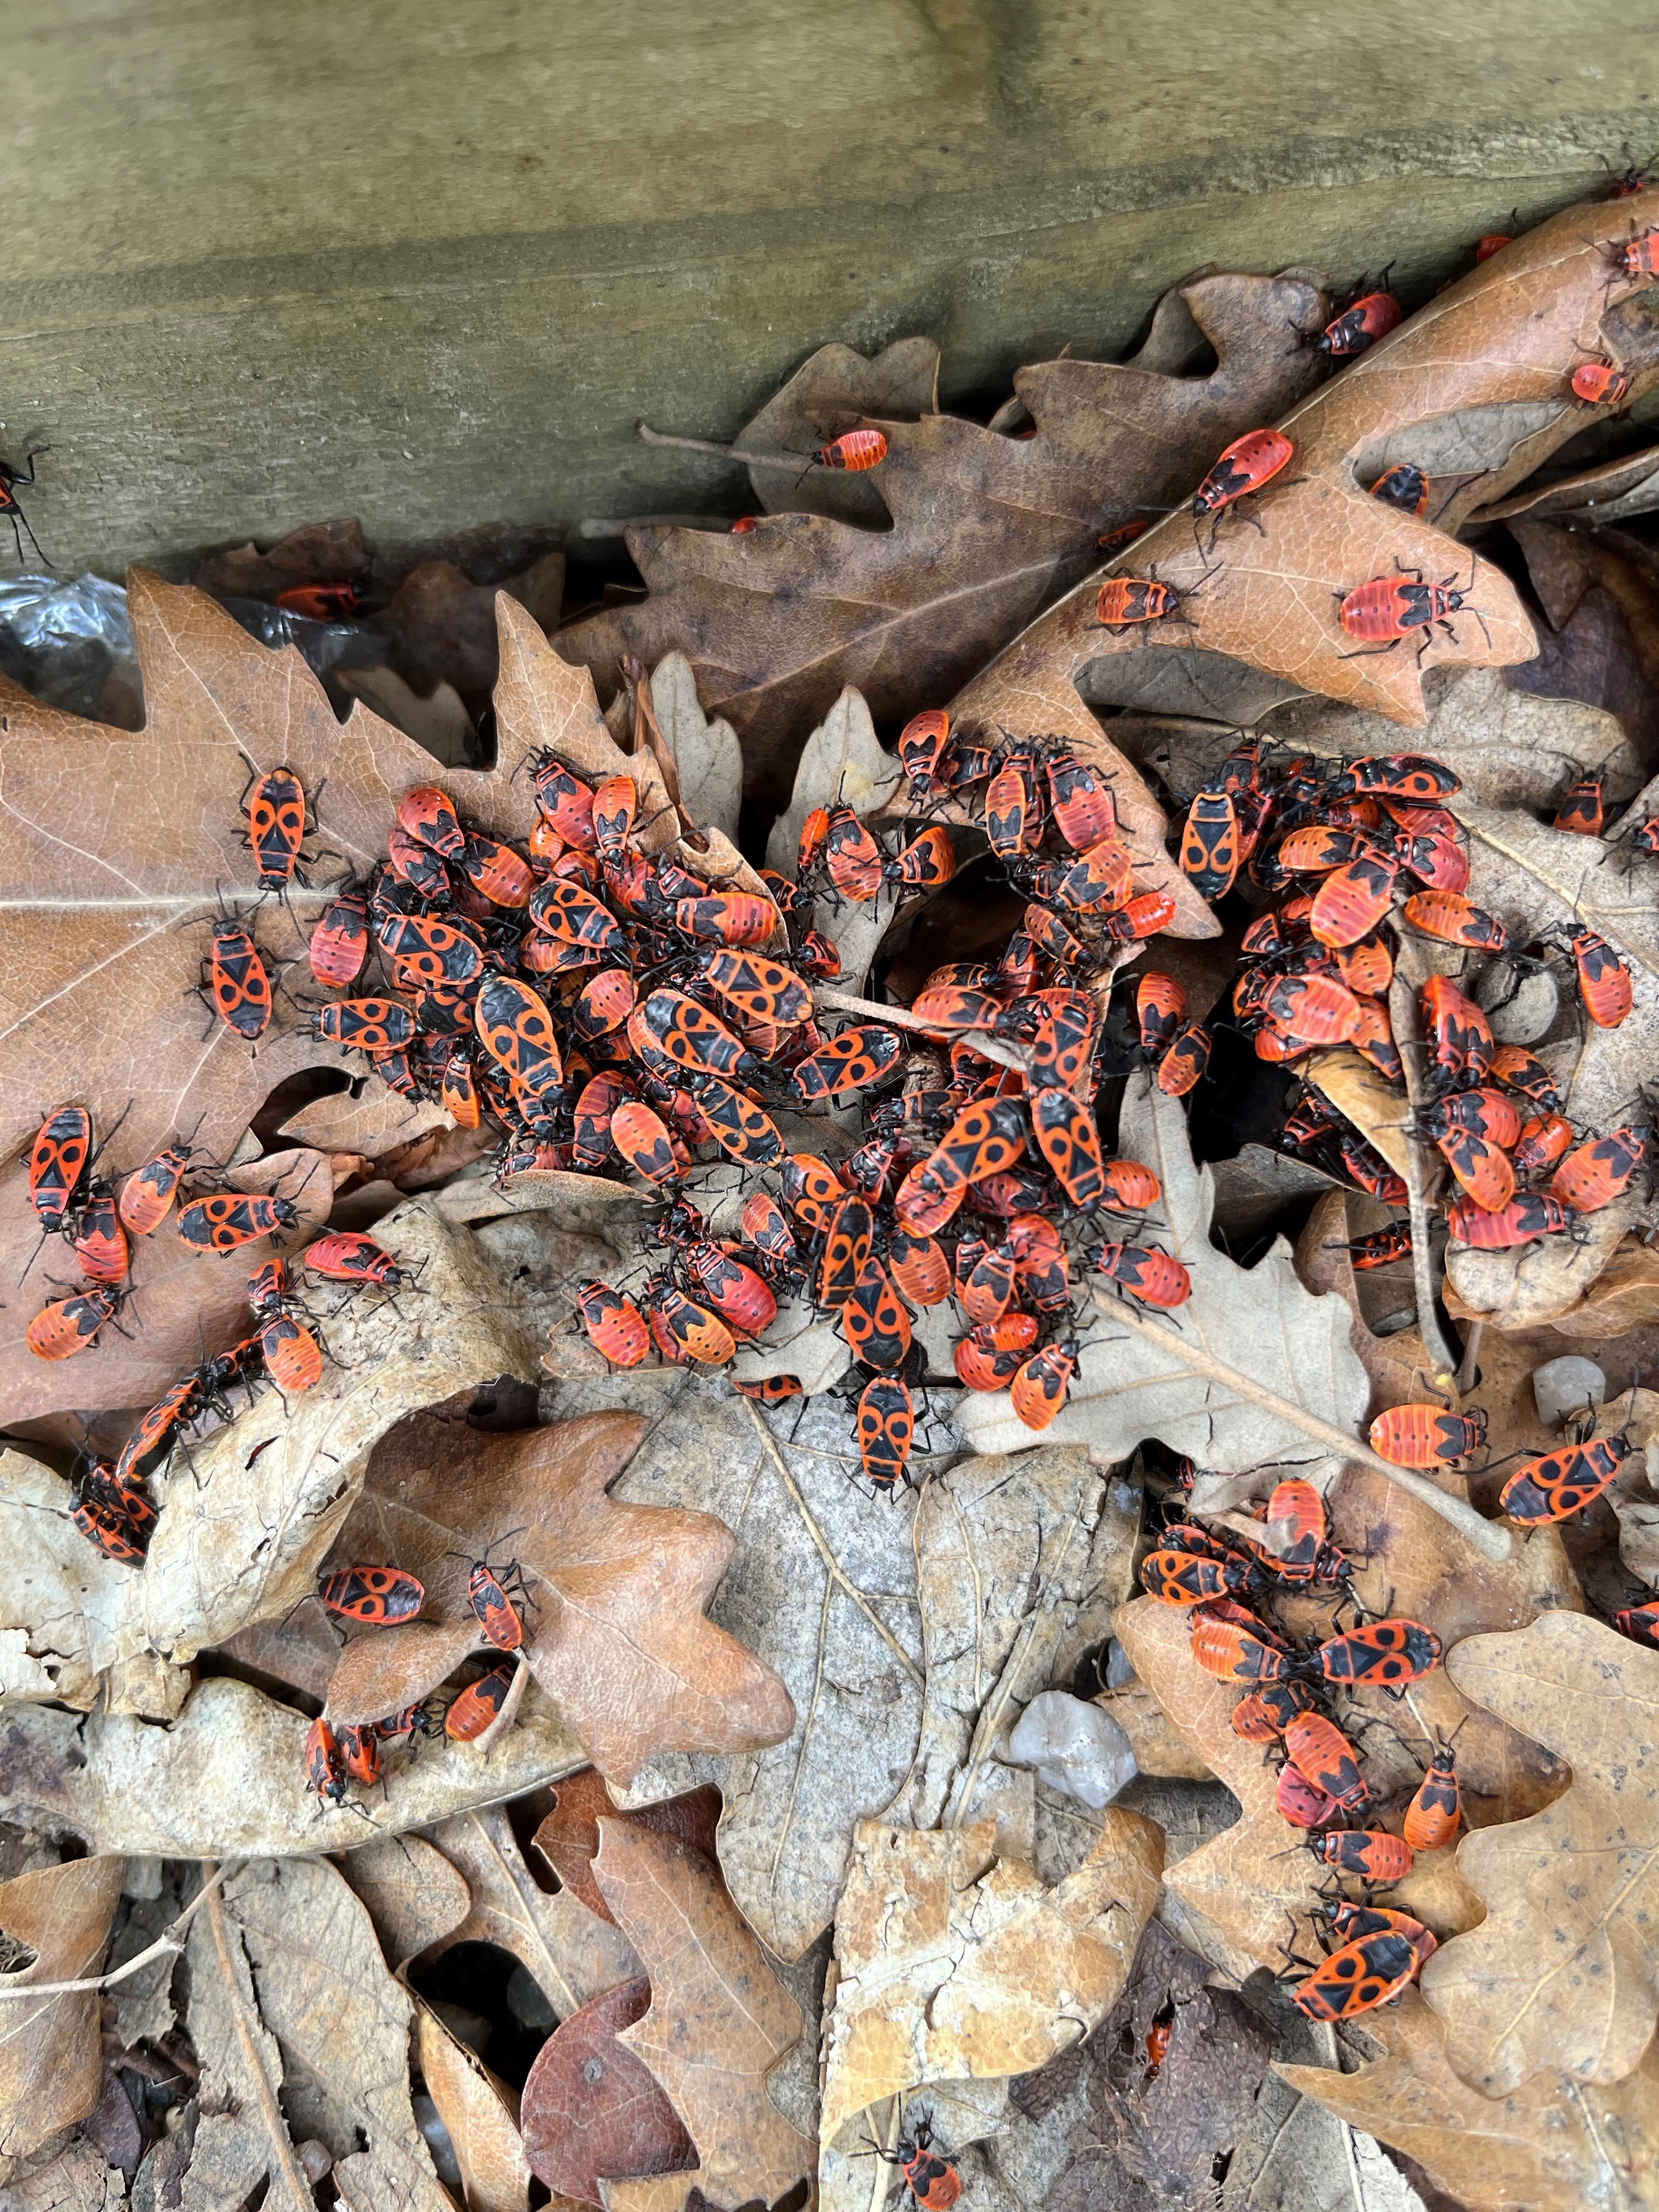 A group of red bugs sit on a pile of brown leaves